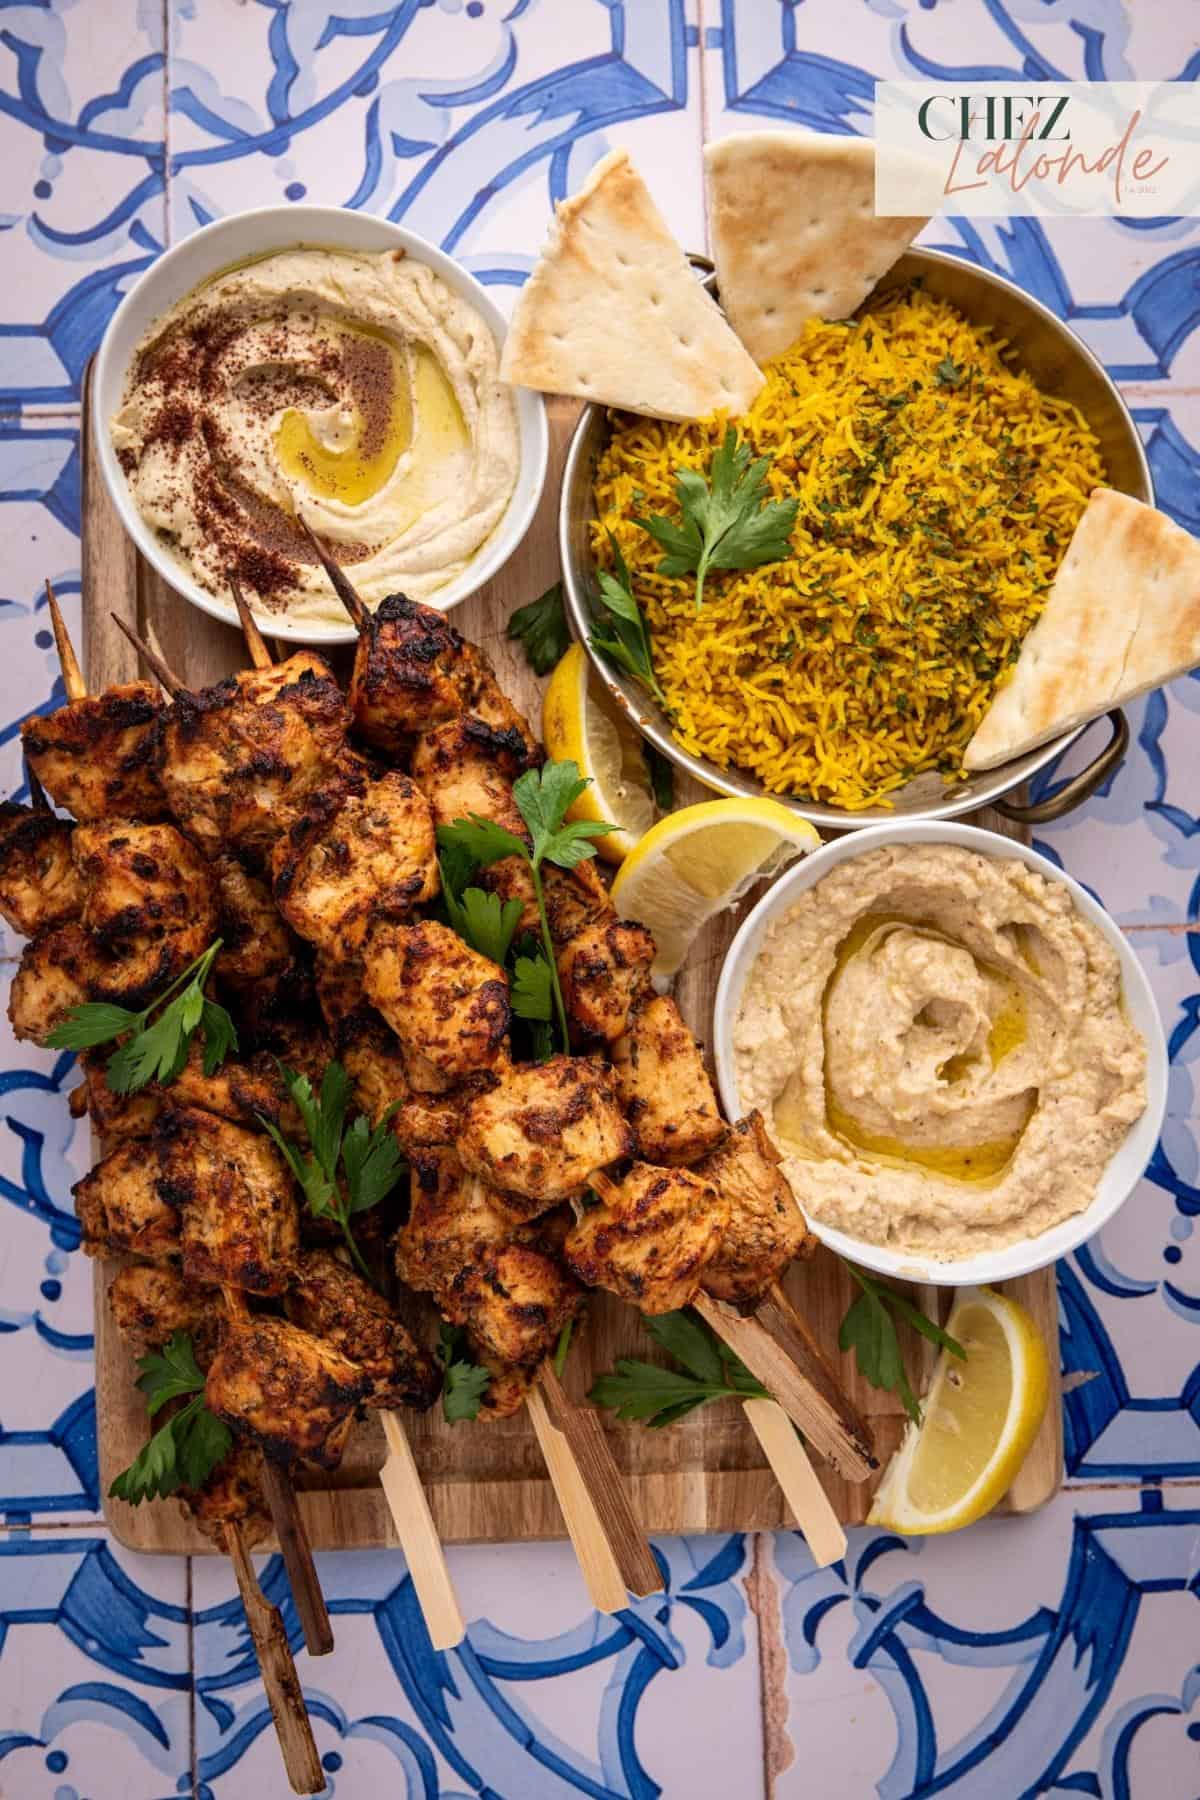 A Mediterranean style mezze platter with many air fryer Shish Tawook skewers served with yellow rice, hummus, and baba ganoush.  